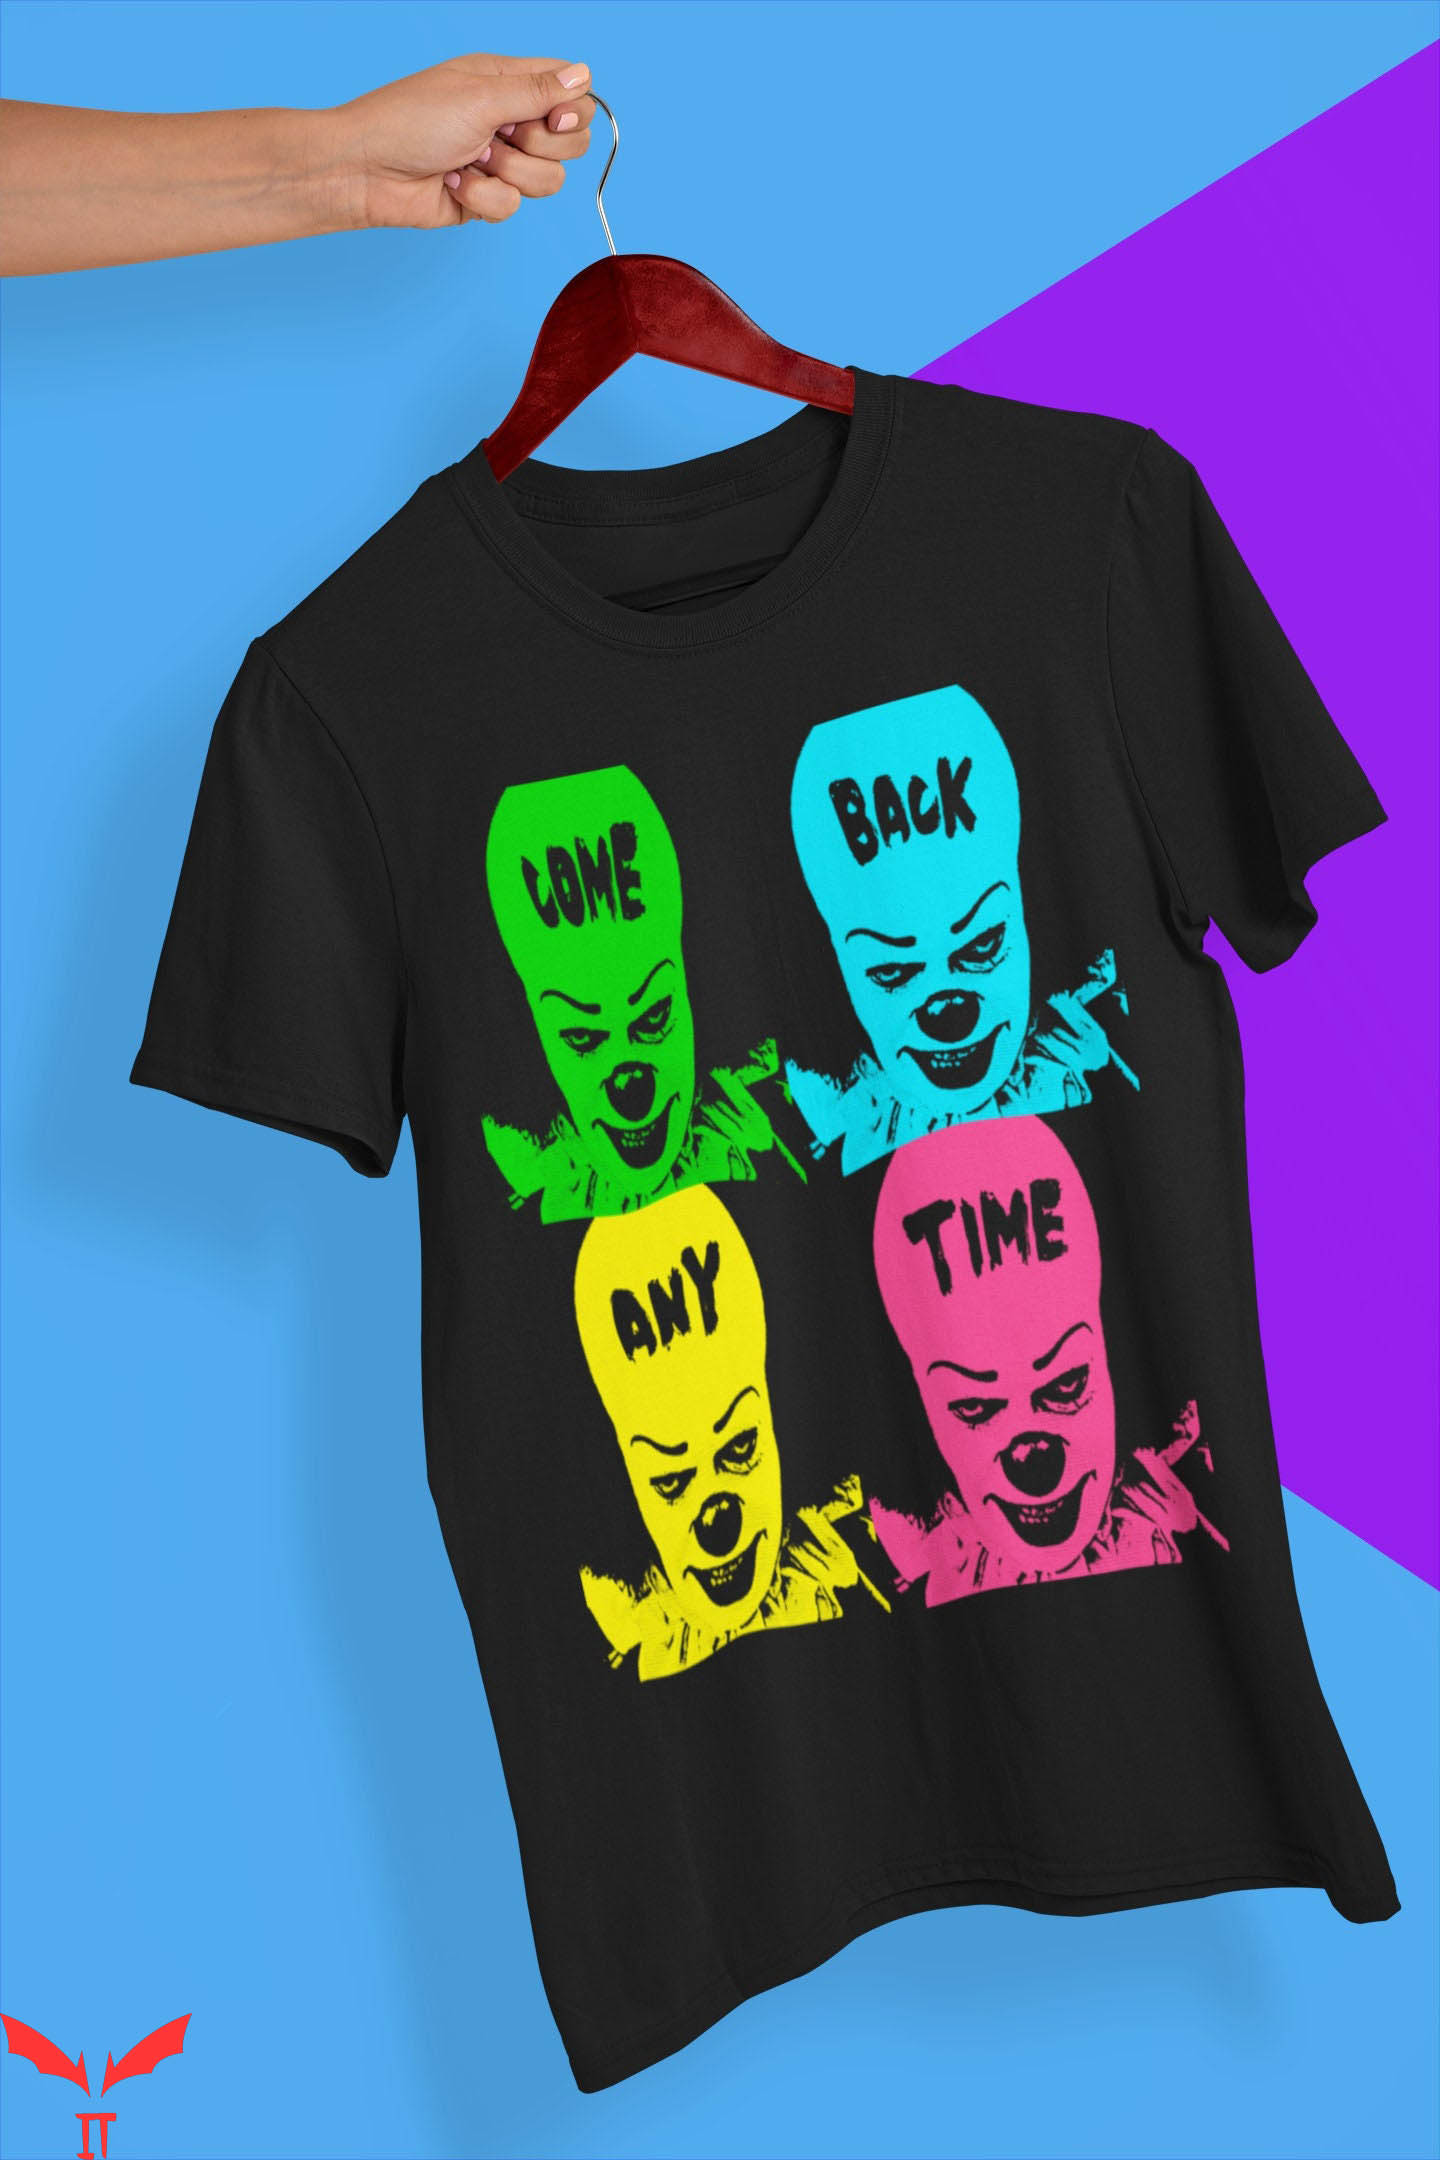 IT The Clown T-Shirt Come Back Any Time Scary Clown